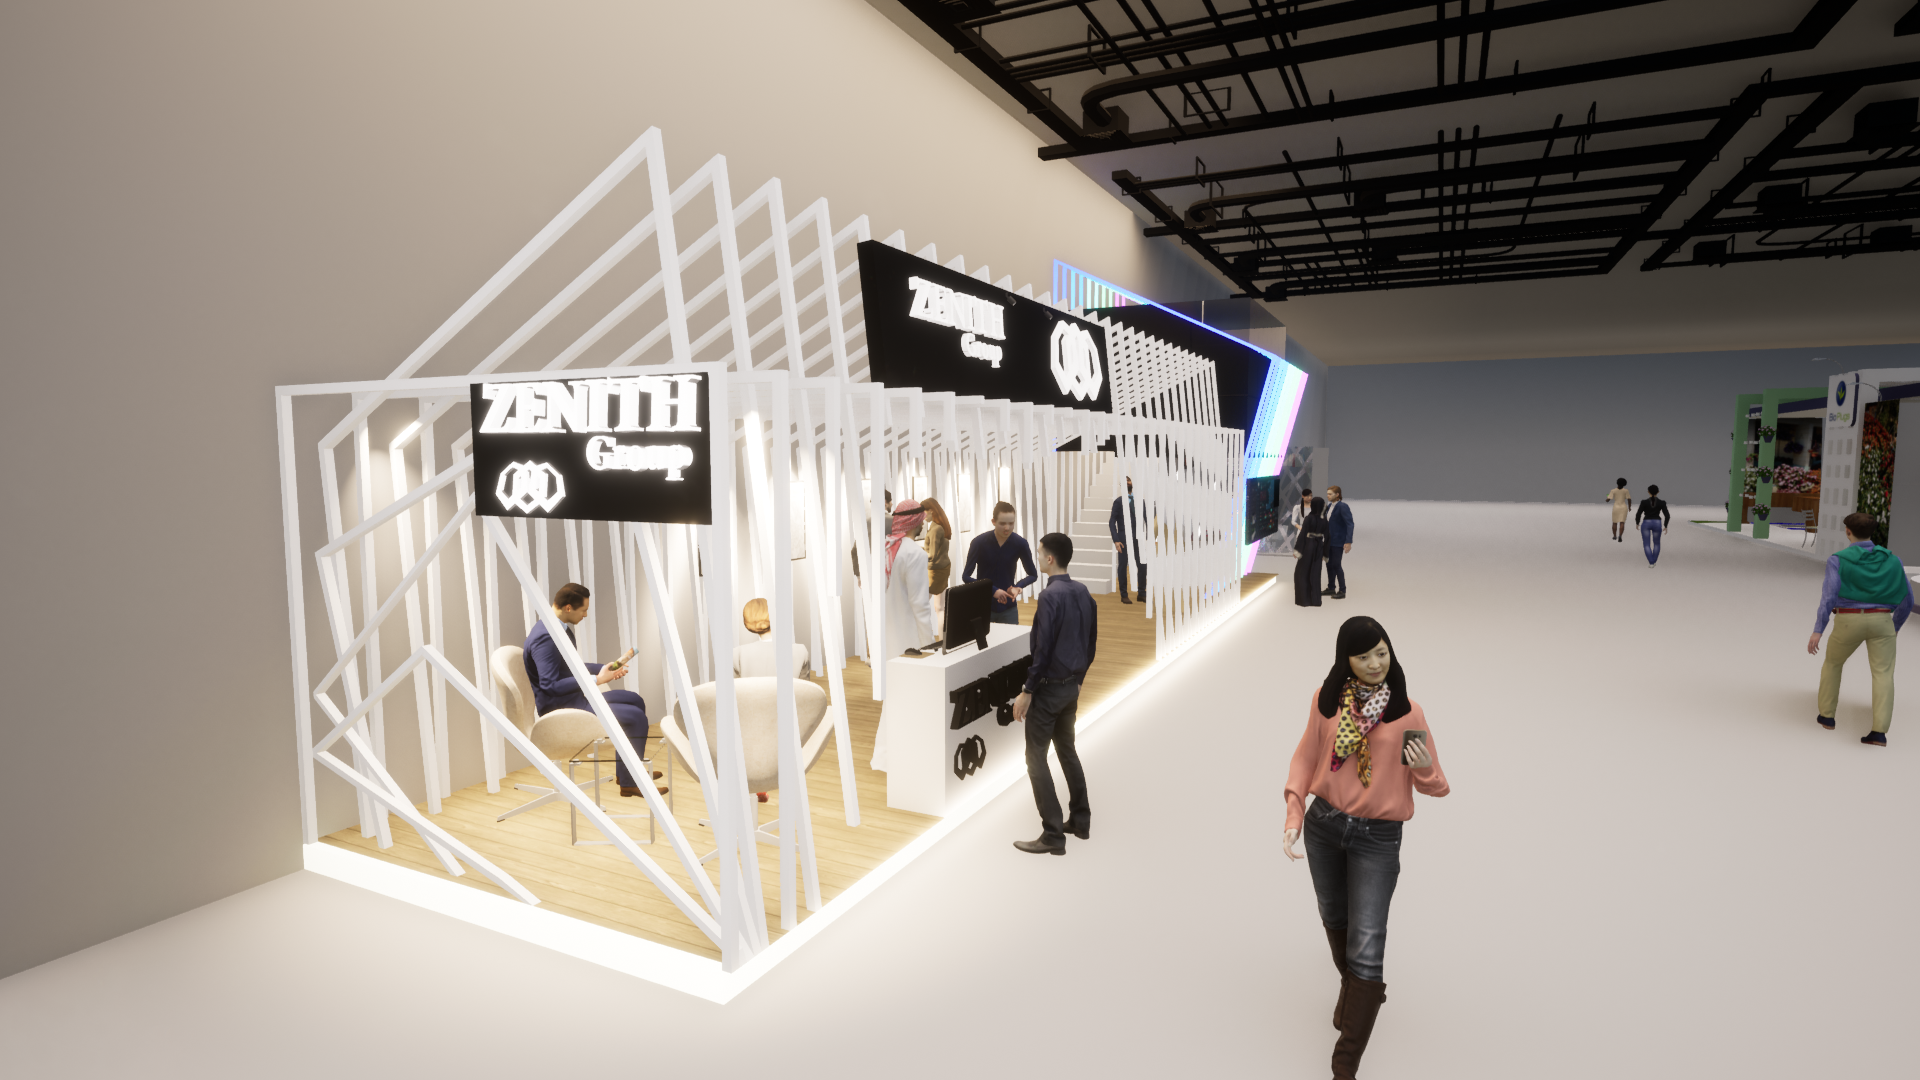 ZENITH Group Stand-Soodeh Abedini-Render (07)